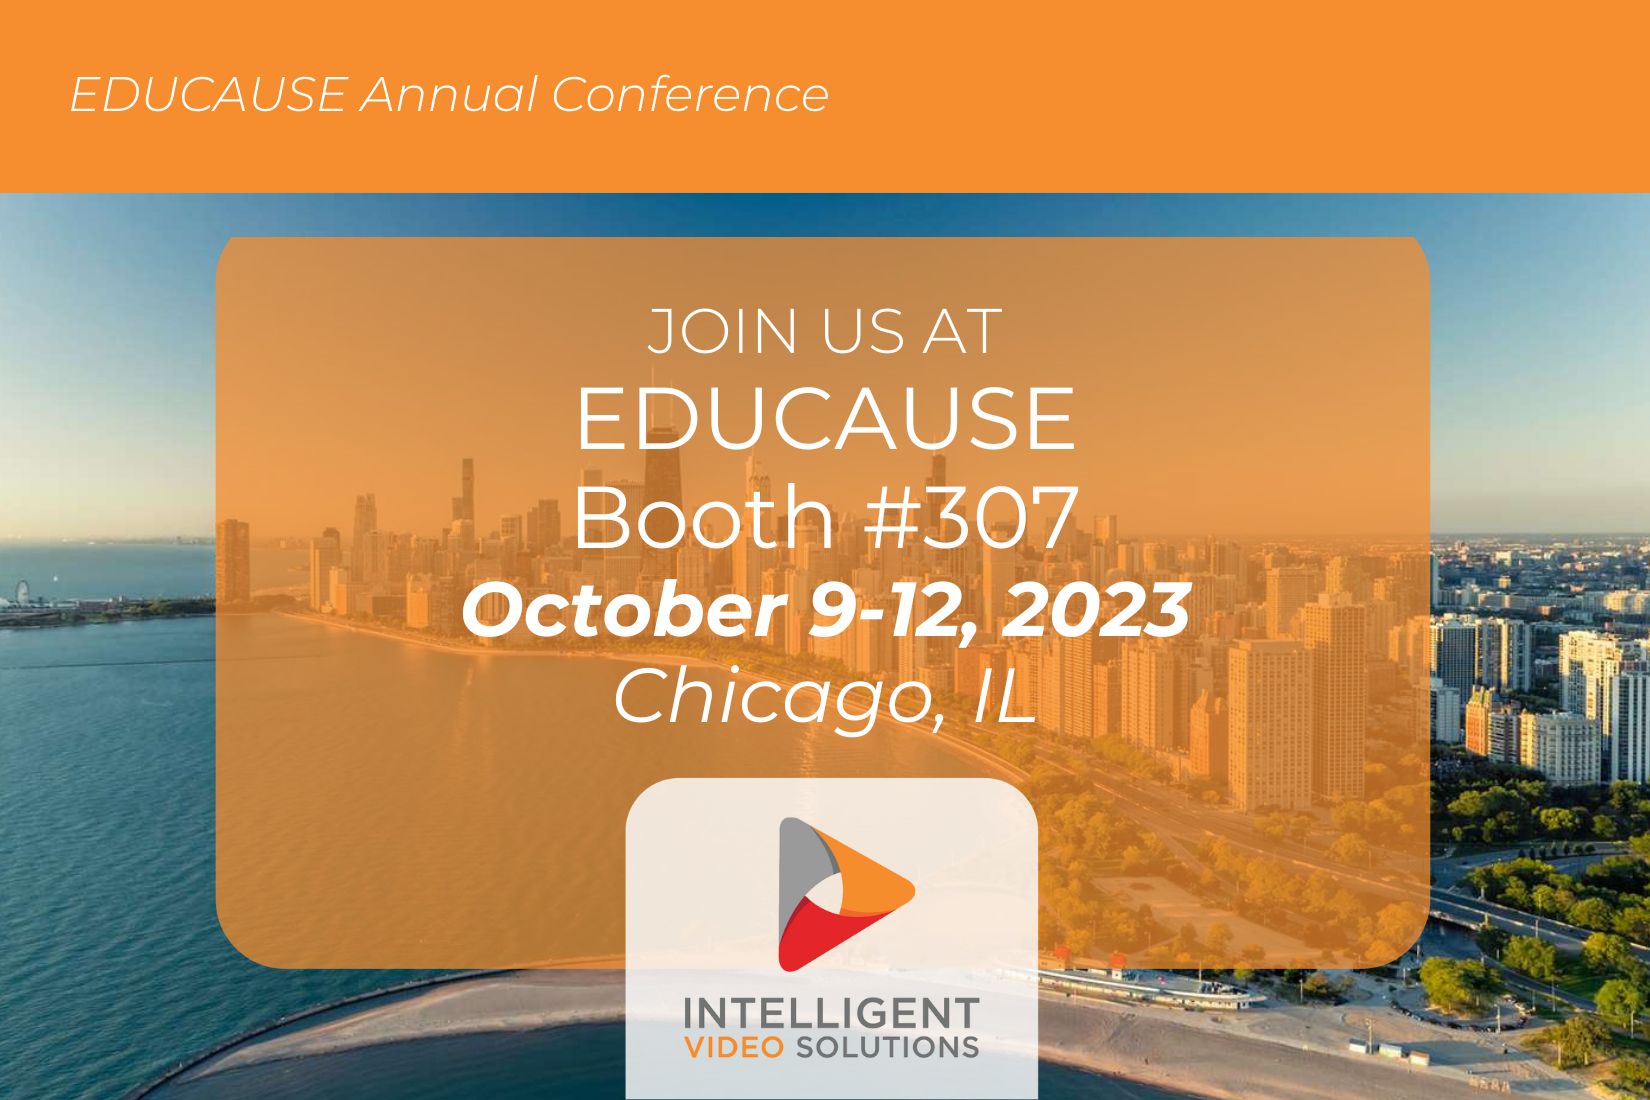 Intelligent Video Solutions exhibiting at EDUCAUSE 2023 in Chicago!